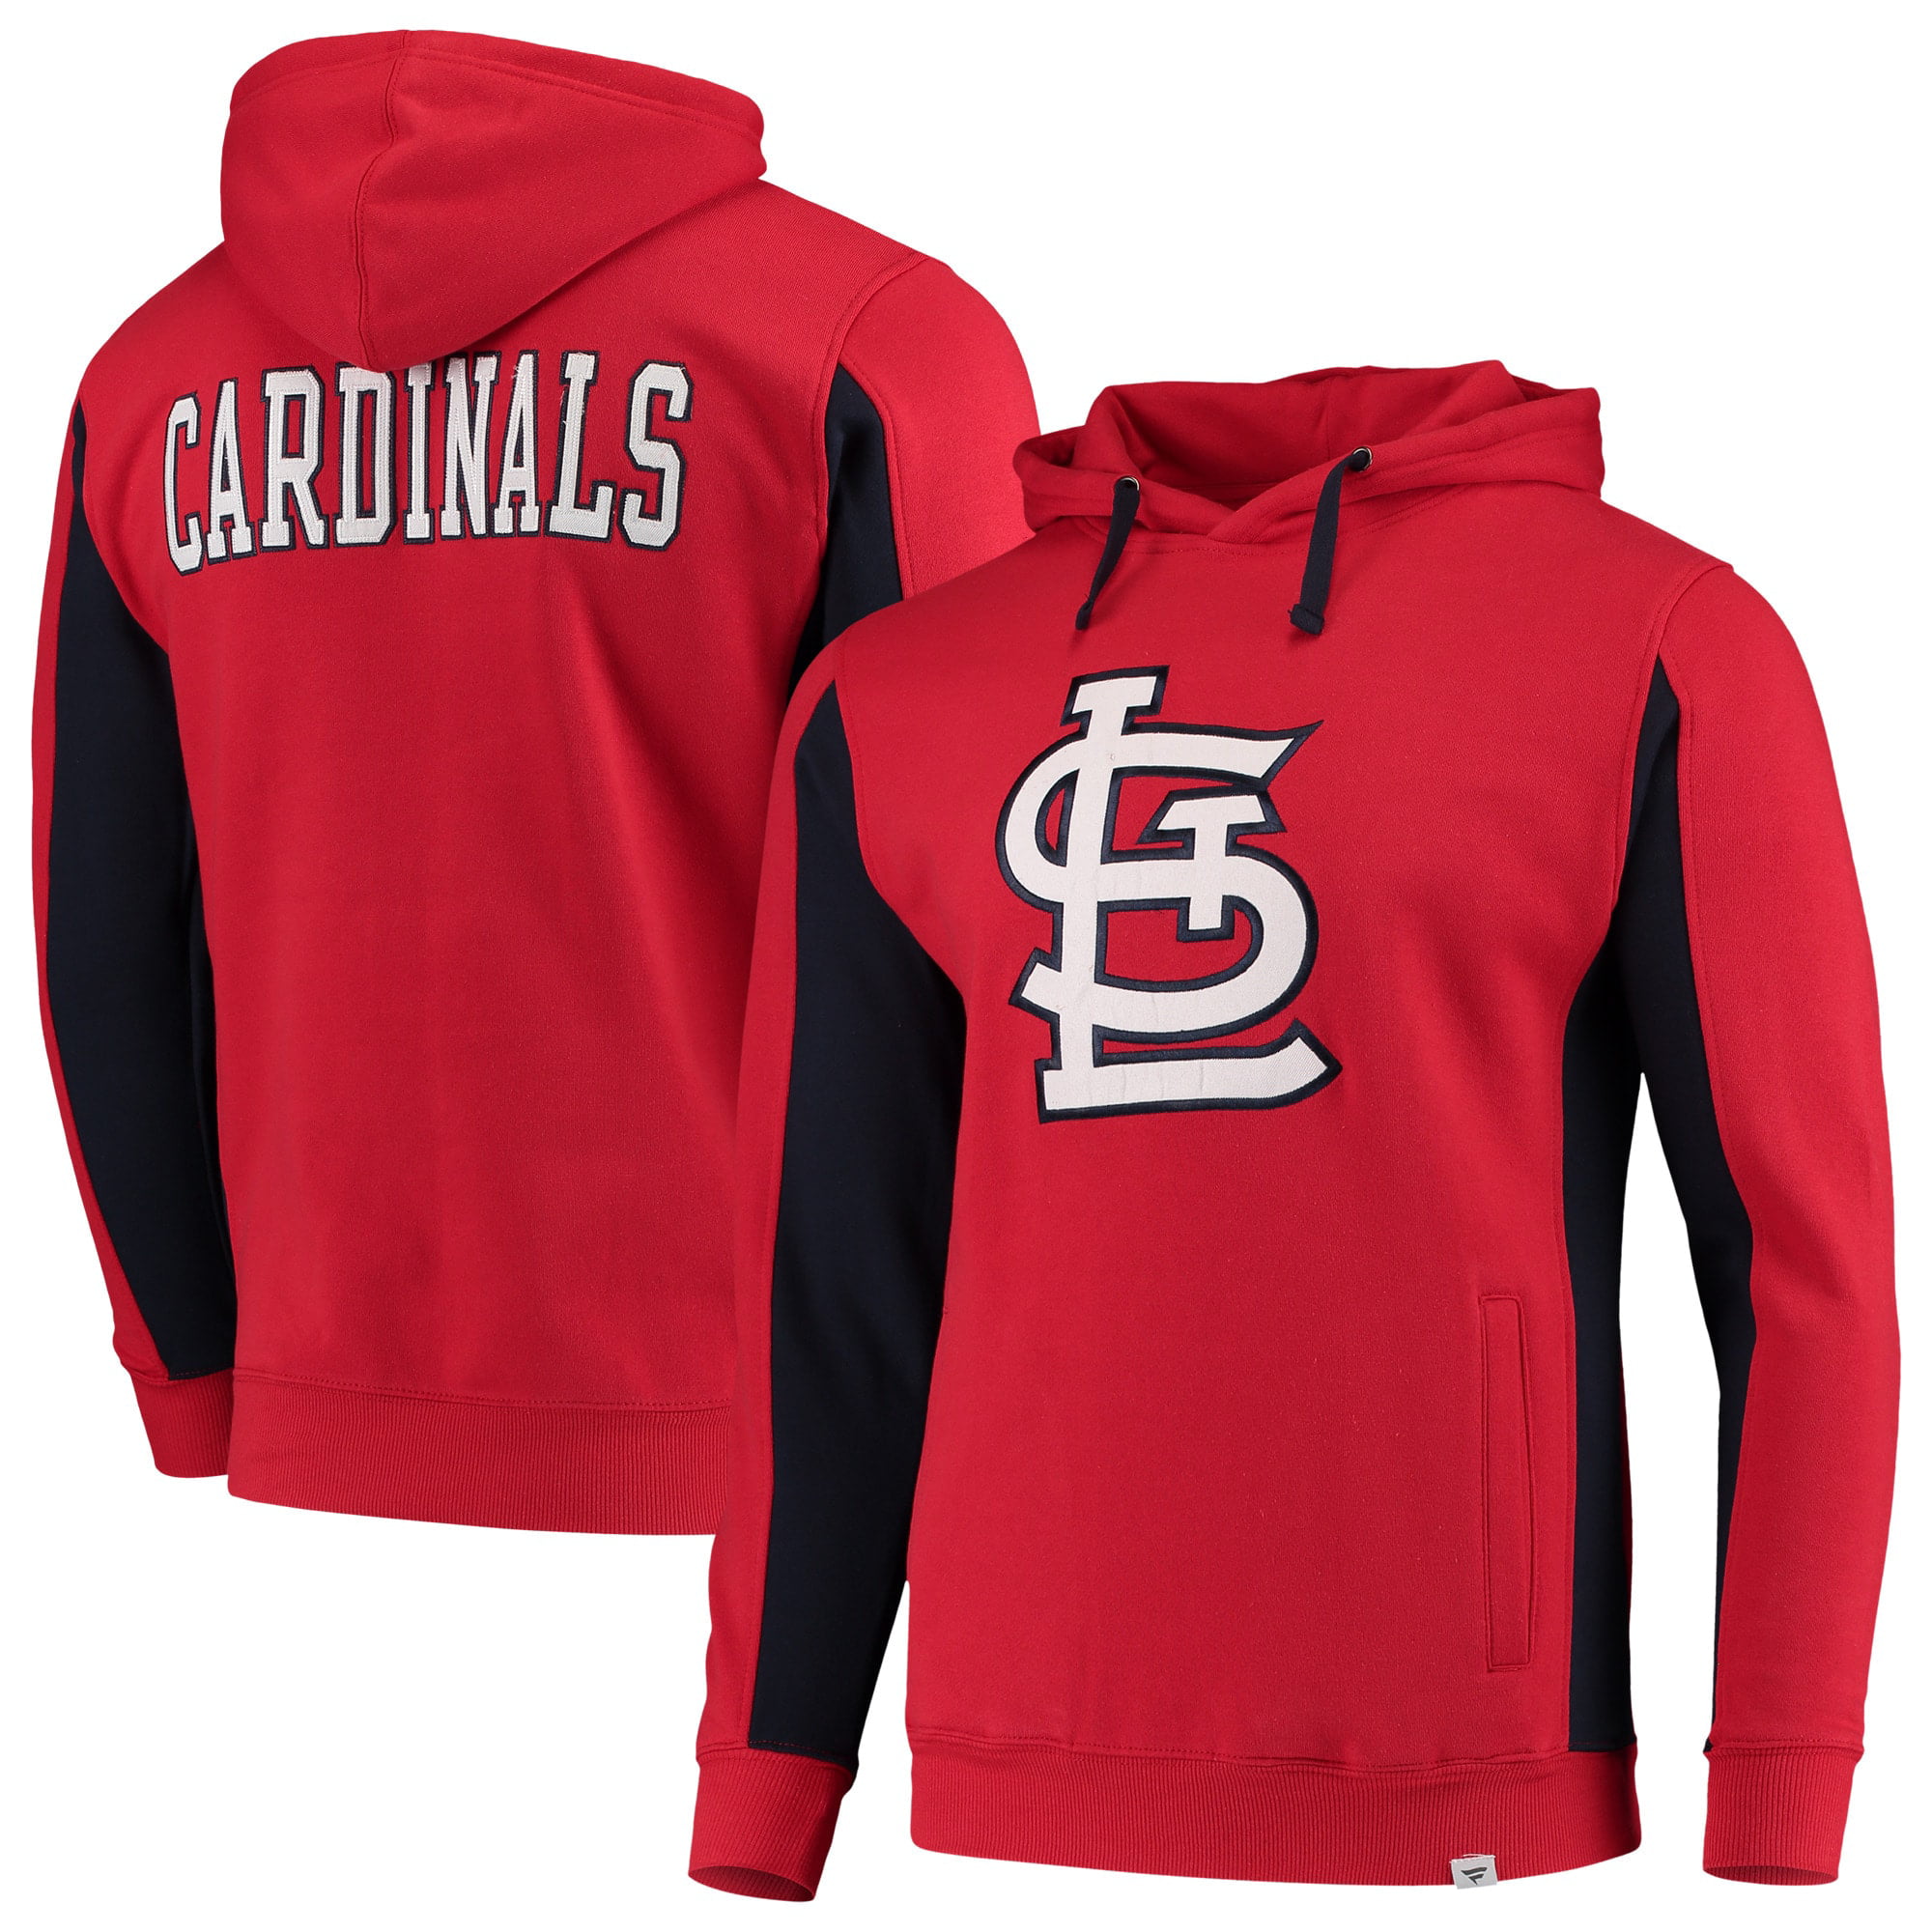 St. Louis Cardinals Fanatics Branded Team Logo Iconic Fleece Pullover Hoodie - Red/Navy ...